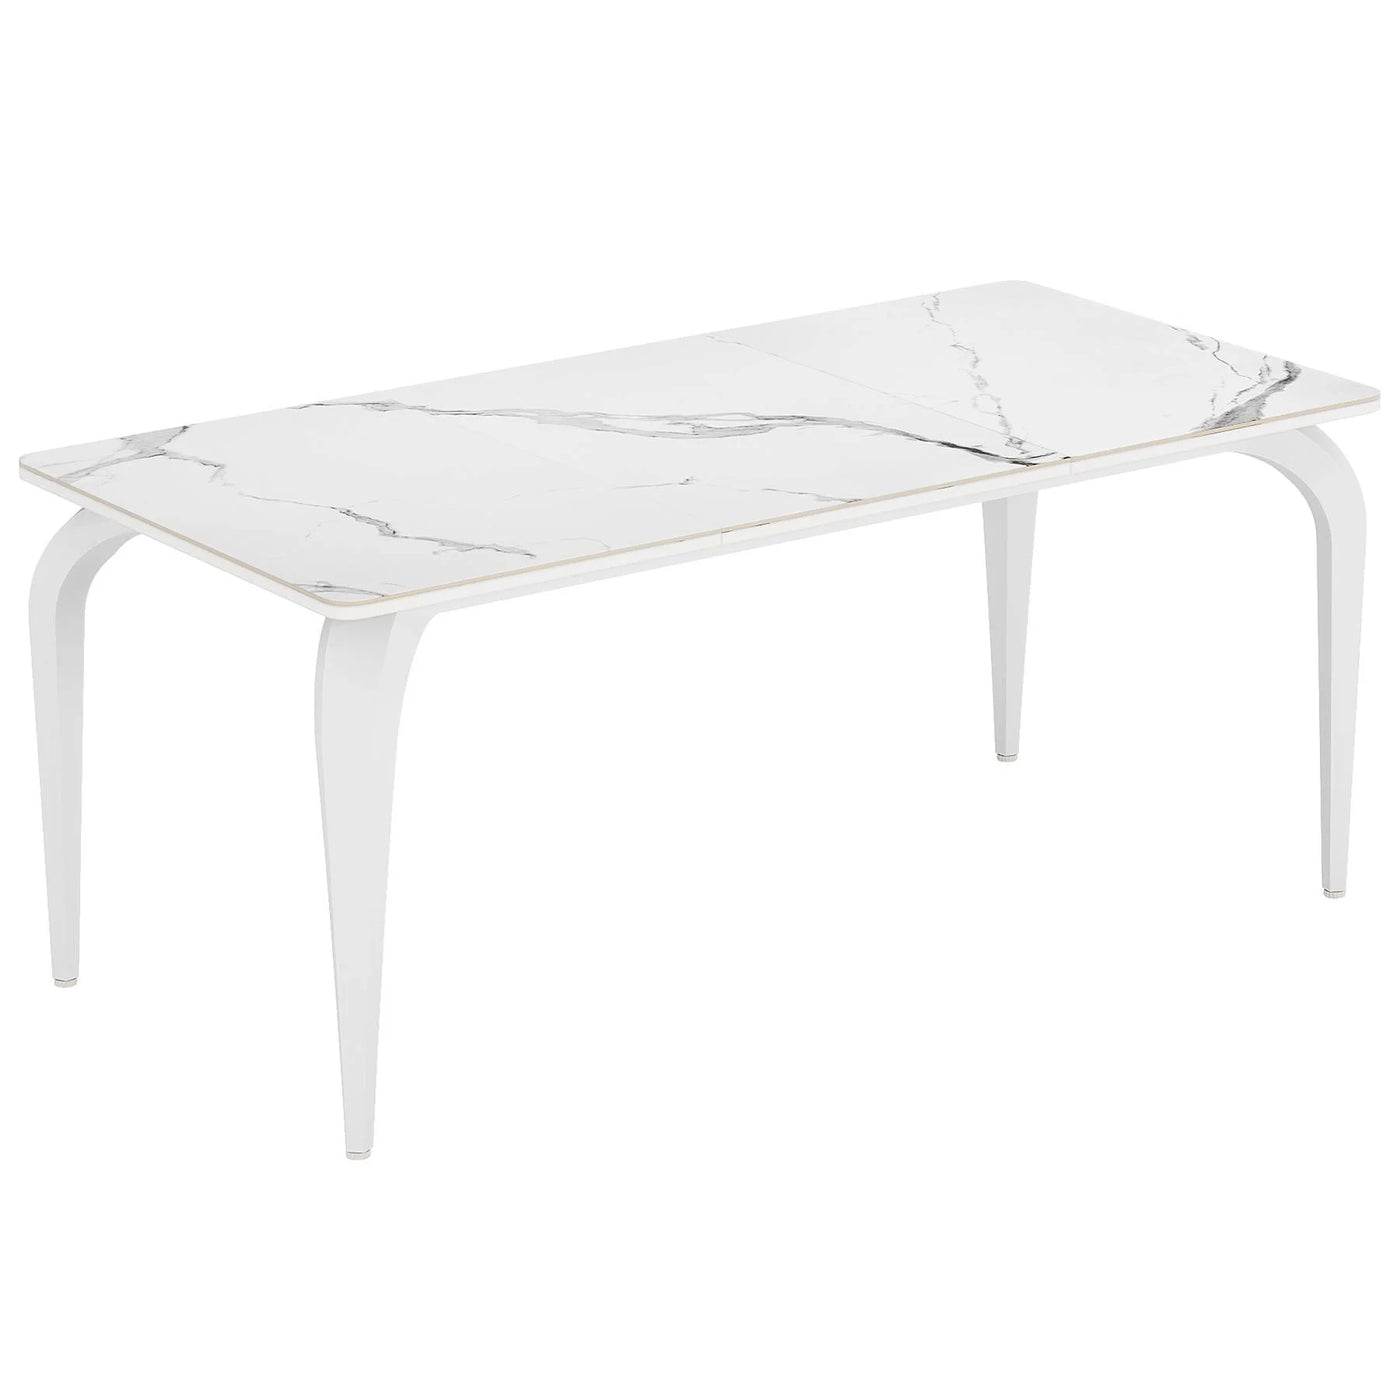 Rever Modern Dining Table | 63" Marble Sintered Stone Kitchen Table with Metal Legs Rectangular